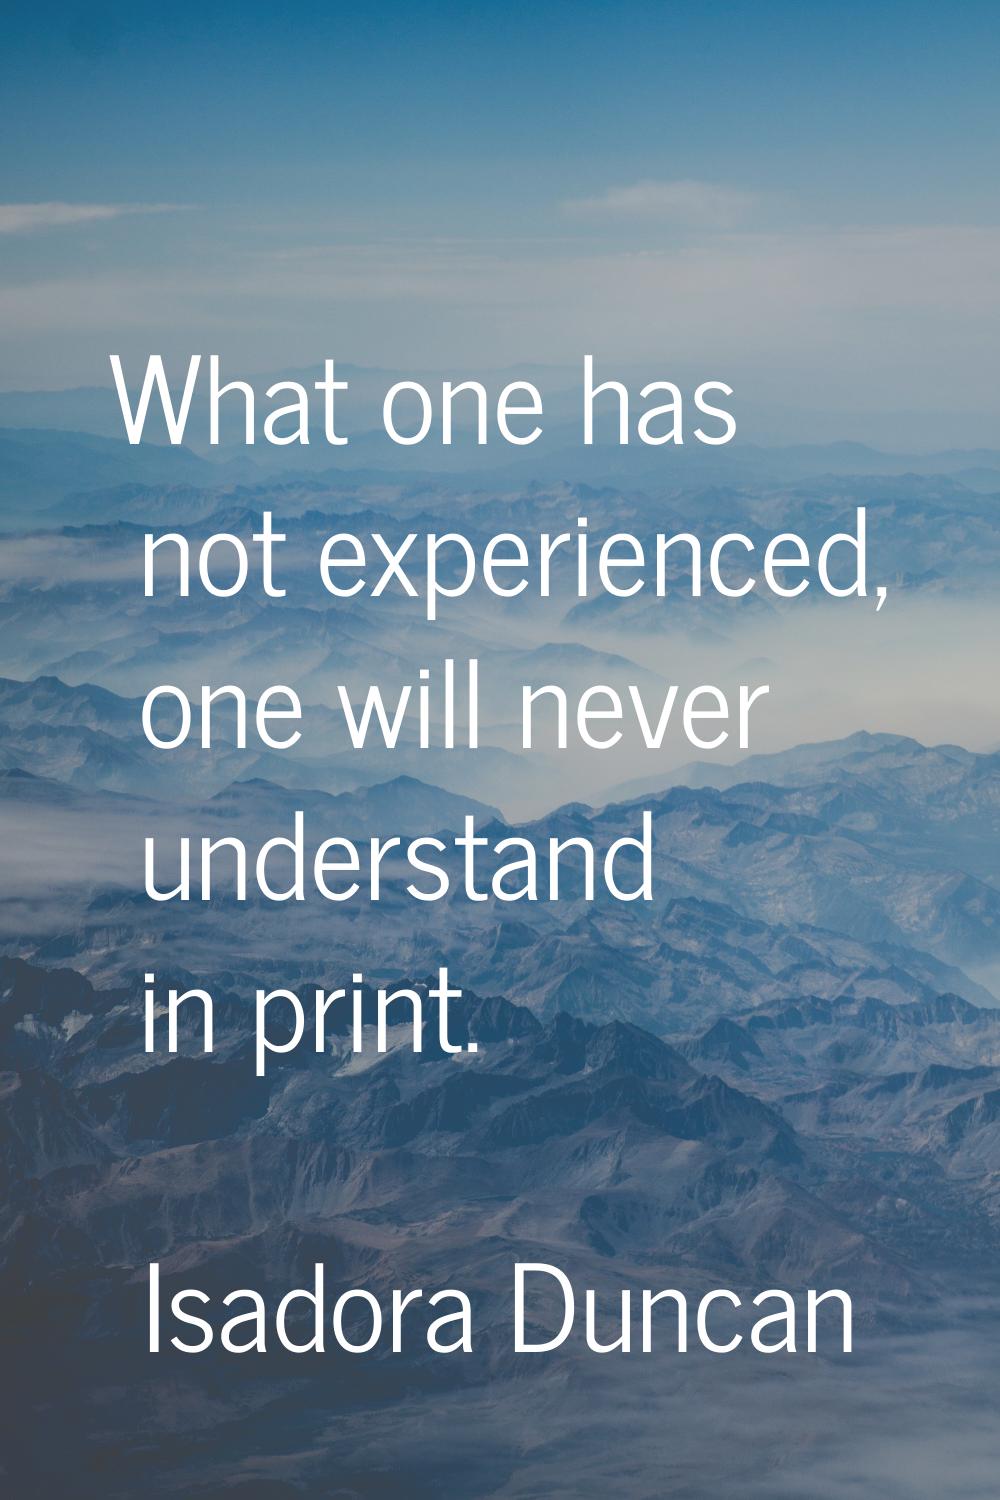 What one has not experienced, one will never understand in print.